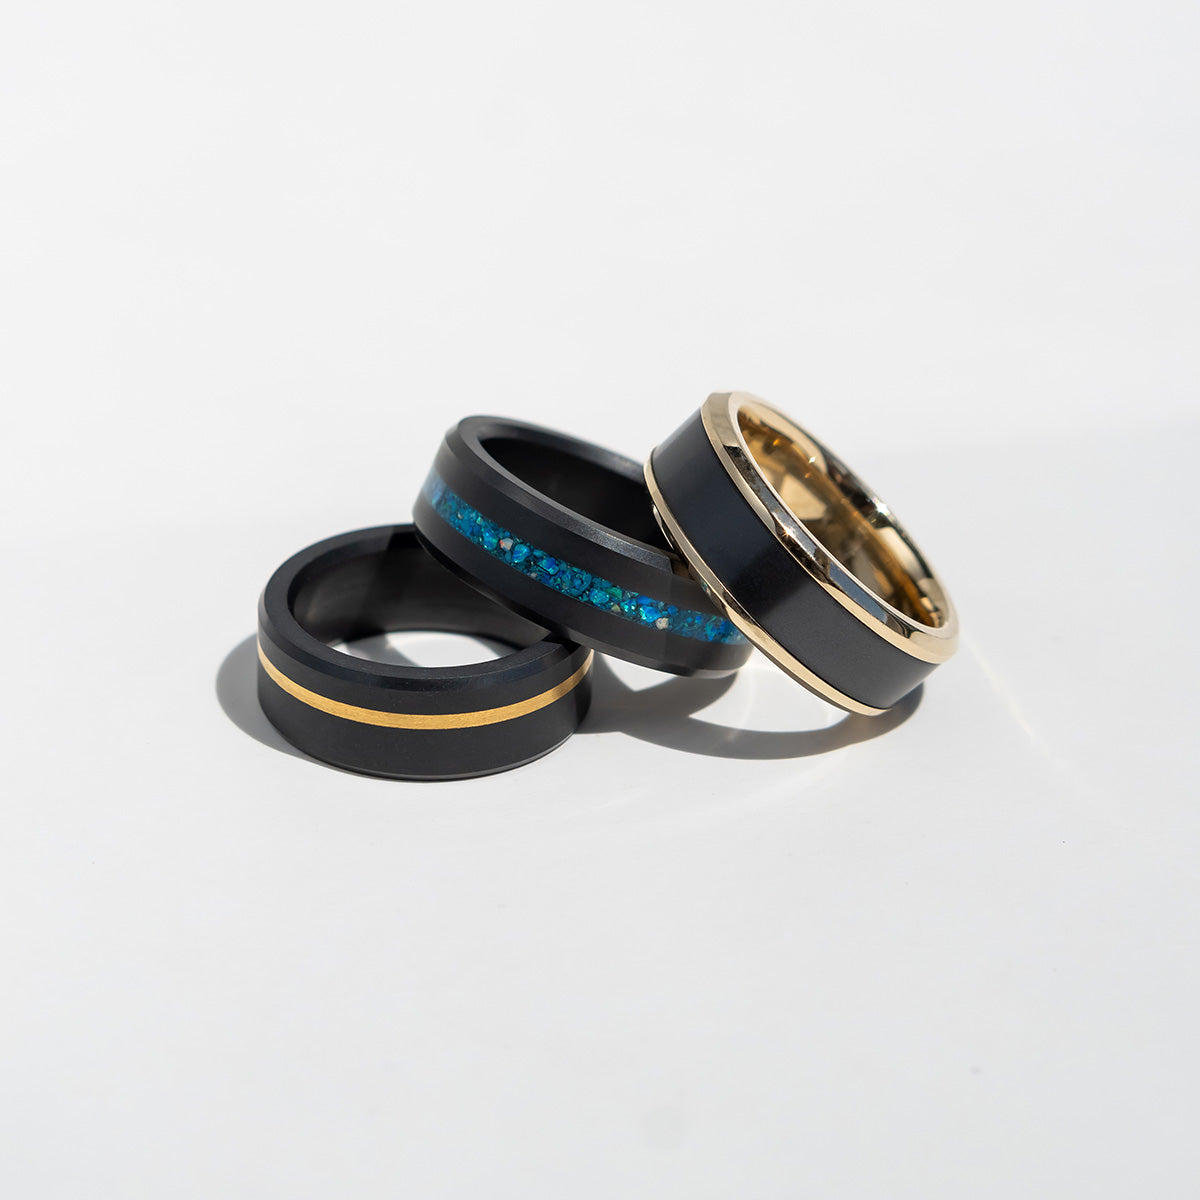 Display of Three Different Black Diamond Wedding Bands with Yellow Gold & Blue Inlays | Inlay Black Diamond Rings | Collections | Elysium Black Diamond